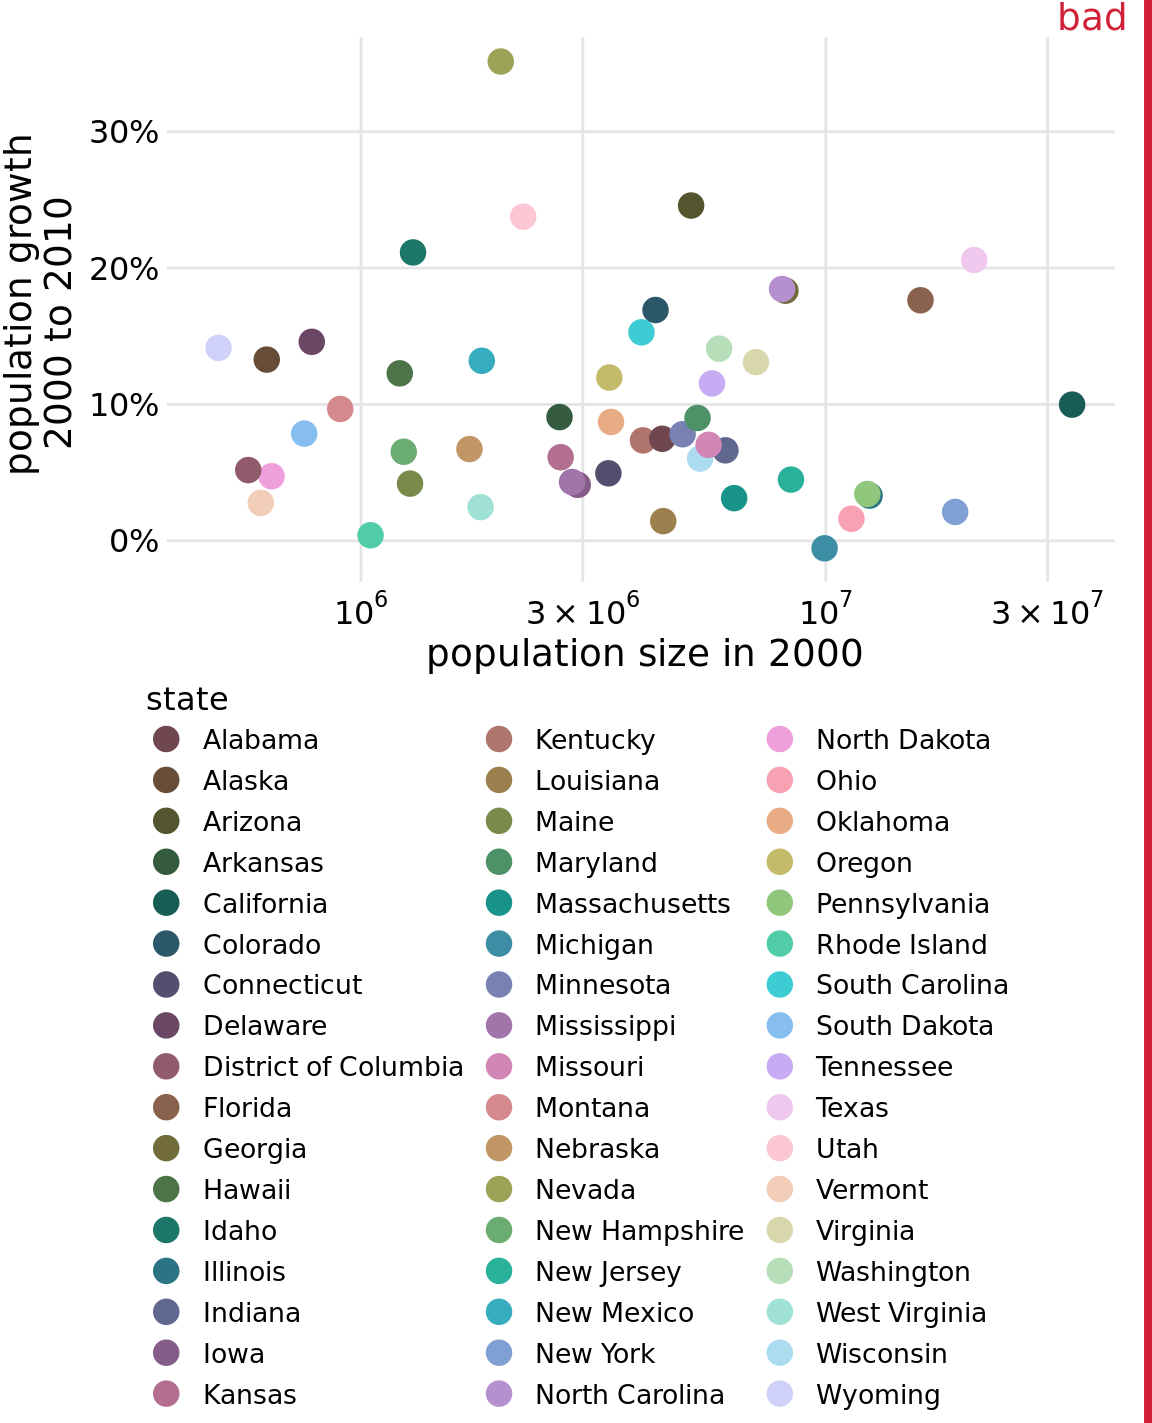 Population growth from 2000 to 2010 versus population size in 2000, for all 50 U.S. states and the District of Columbia. Every state is marked in a different color. Because there are so many states, it is very difficult to match the colors in the legend to the dots in the scatter plot. Data source: U.S. Census Bureau